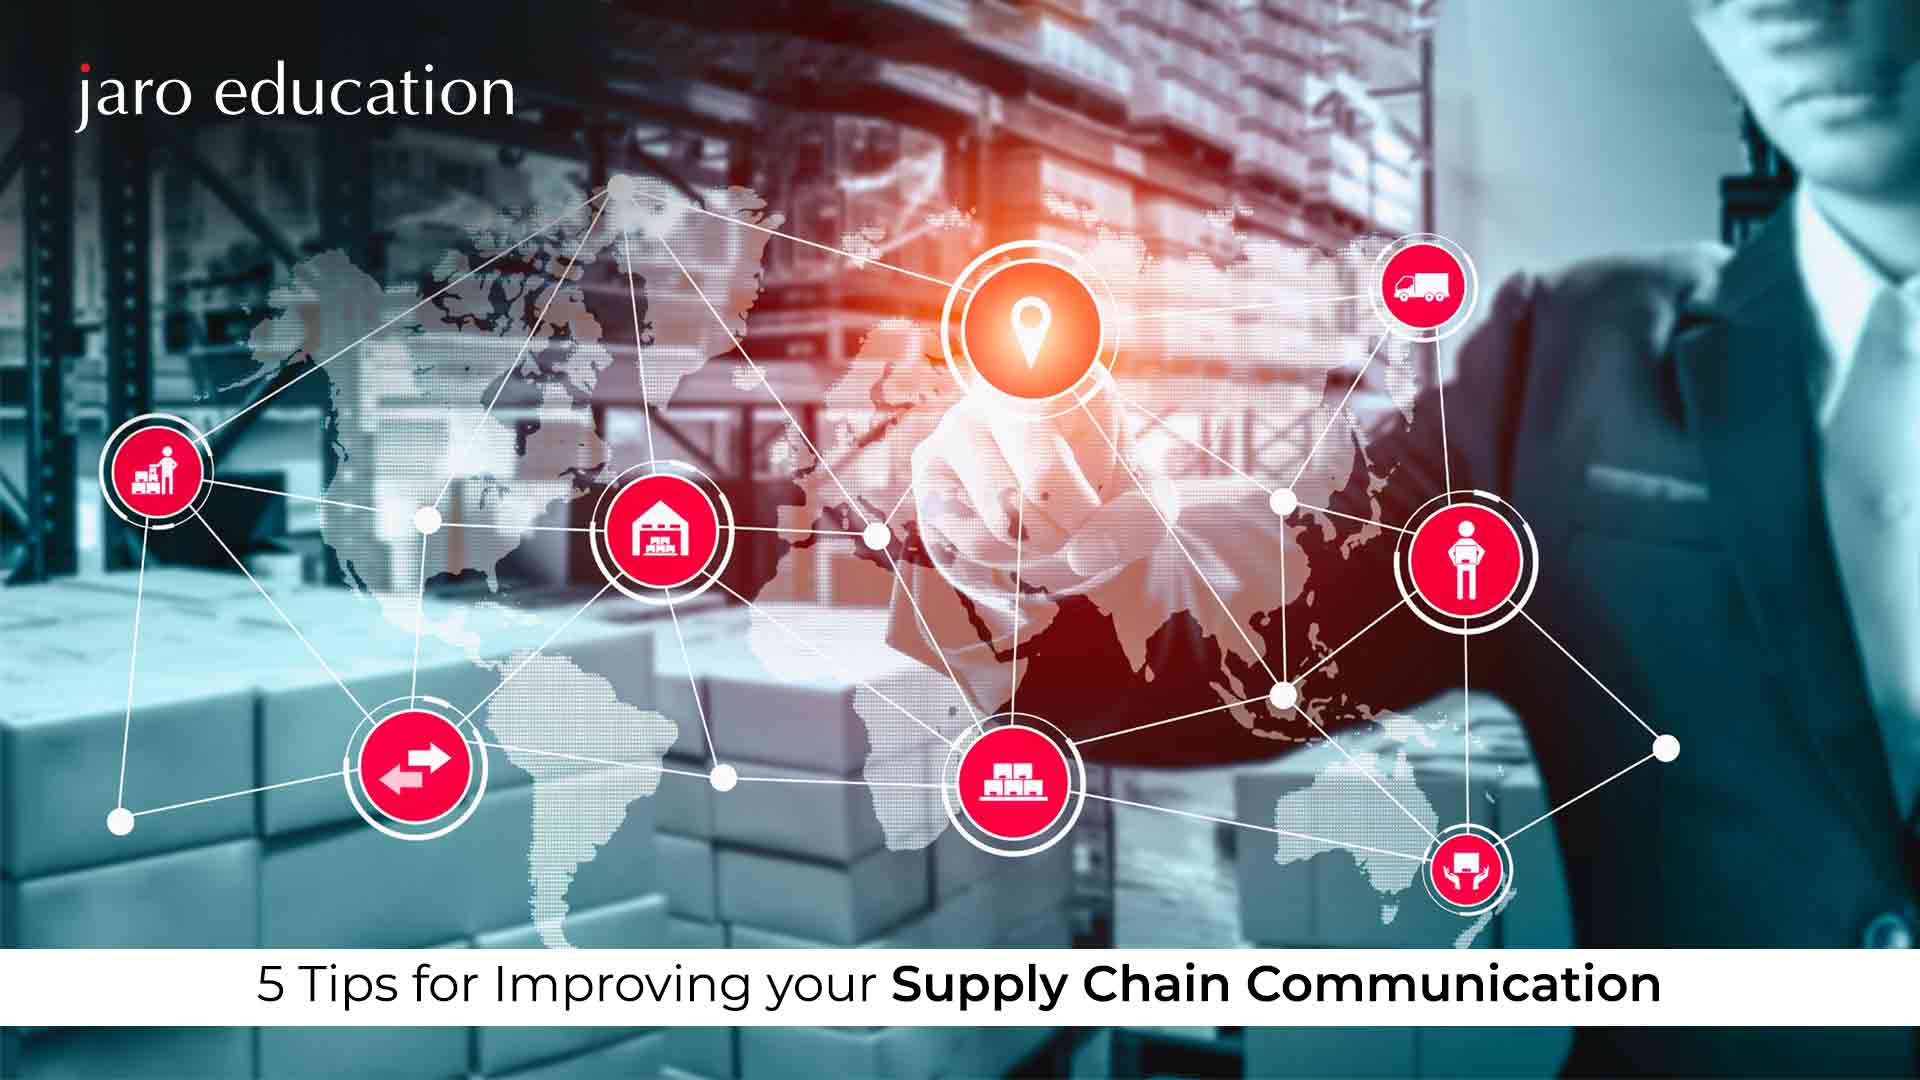 5-Tips-for-Improving-your-Supply-Chain-Communication jaro